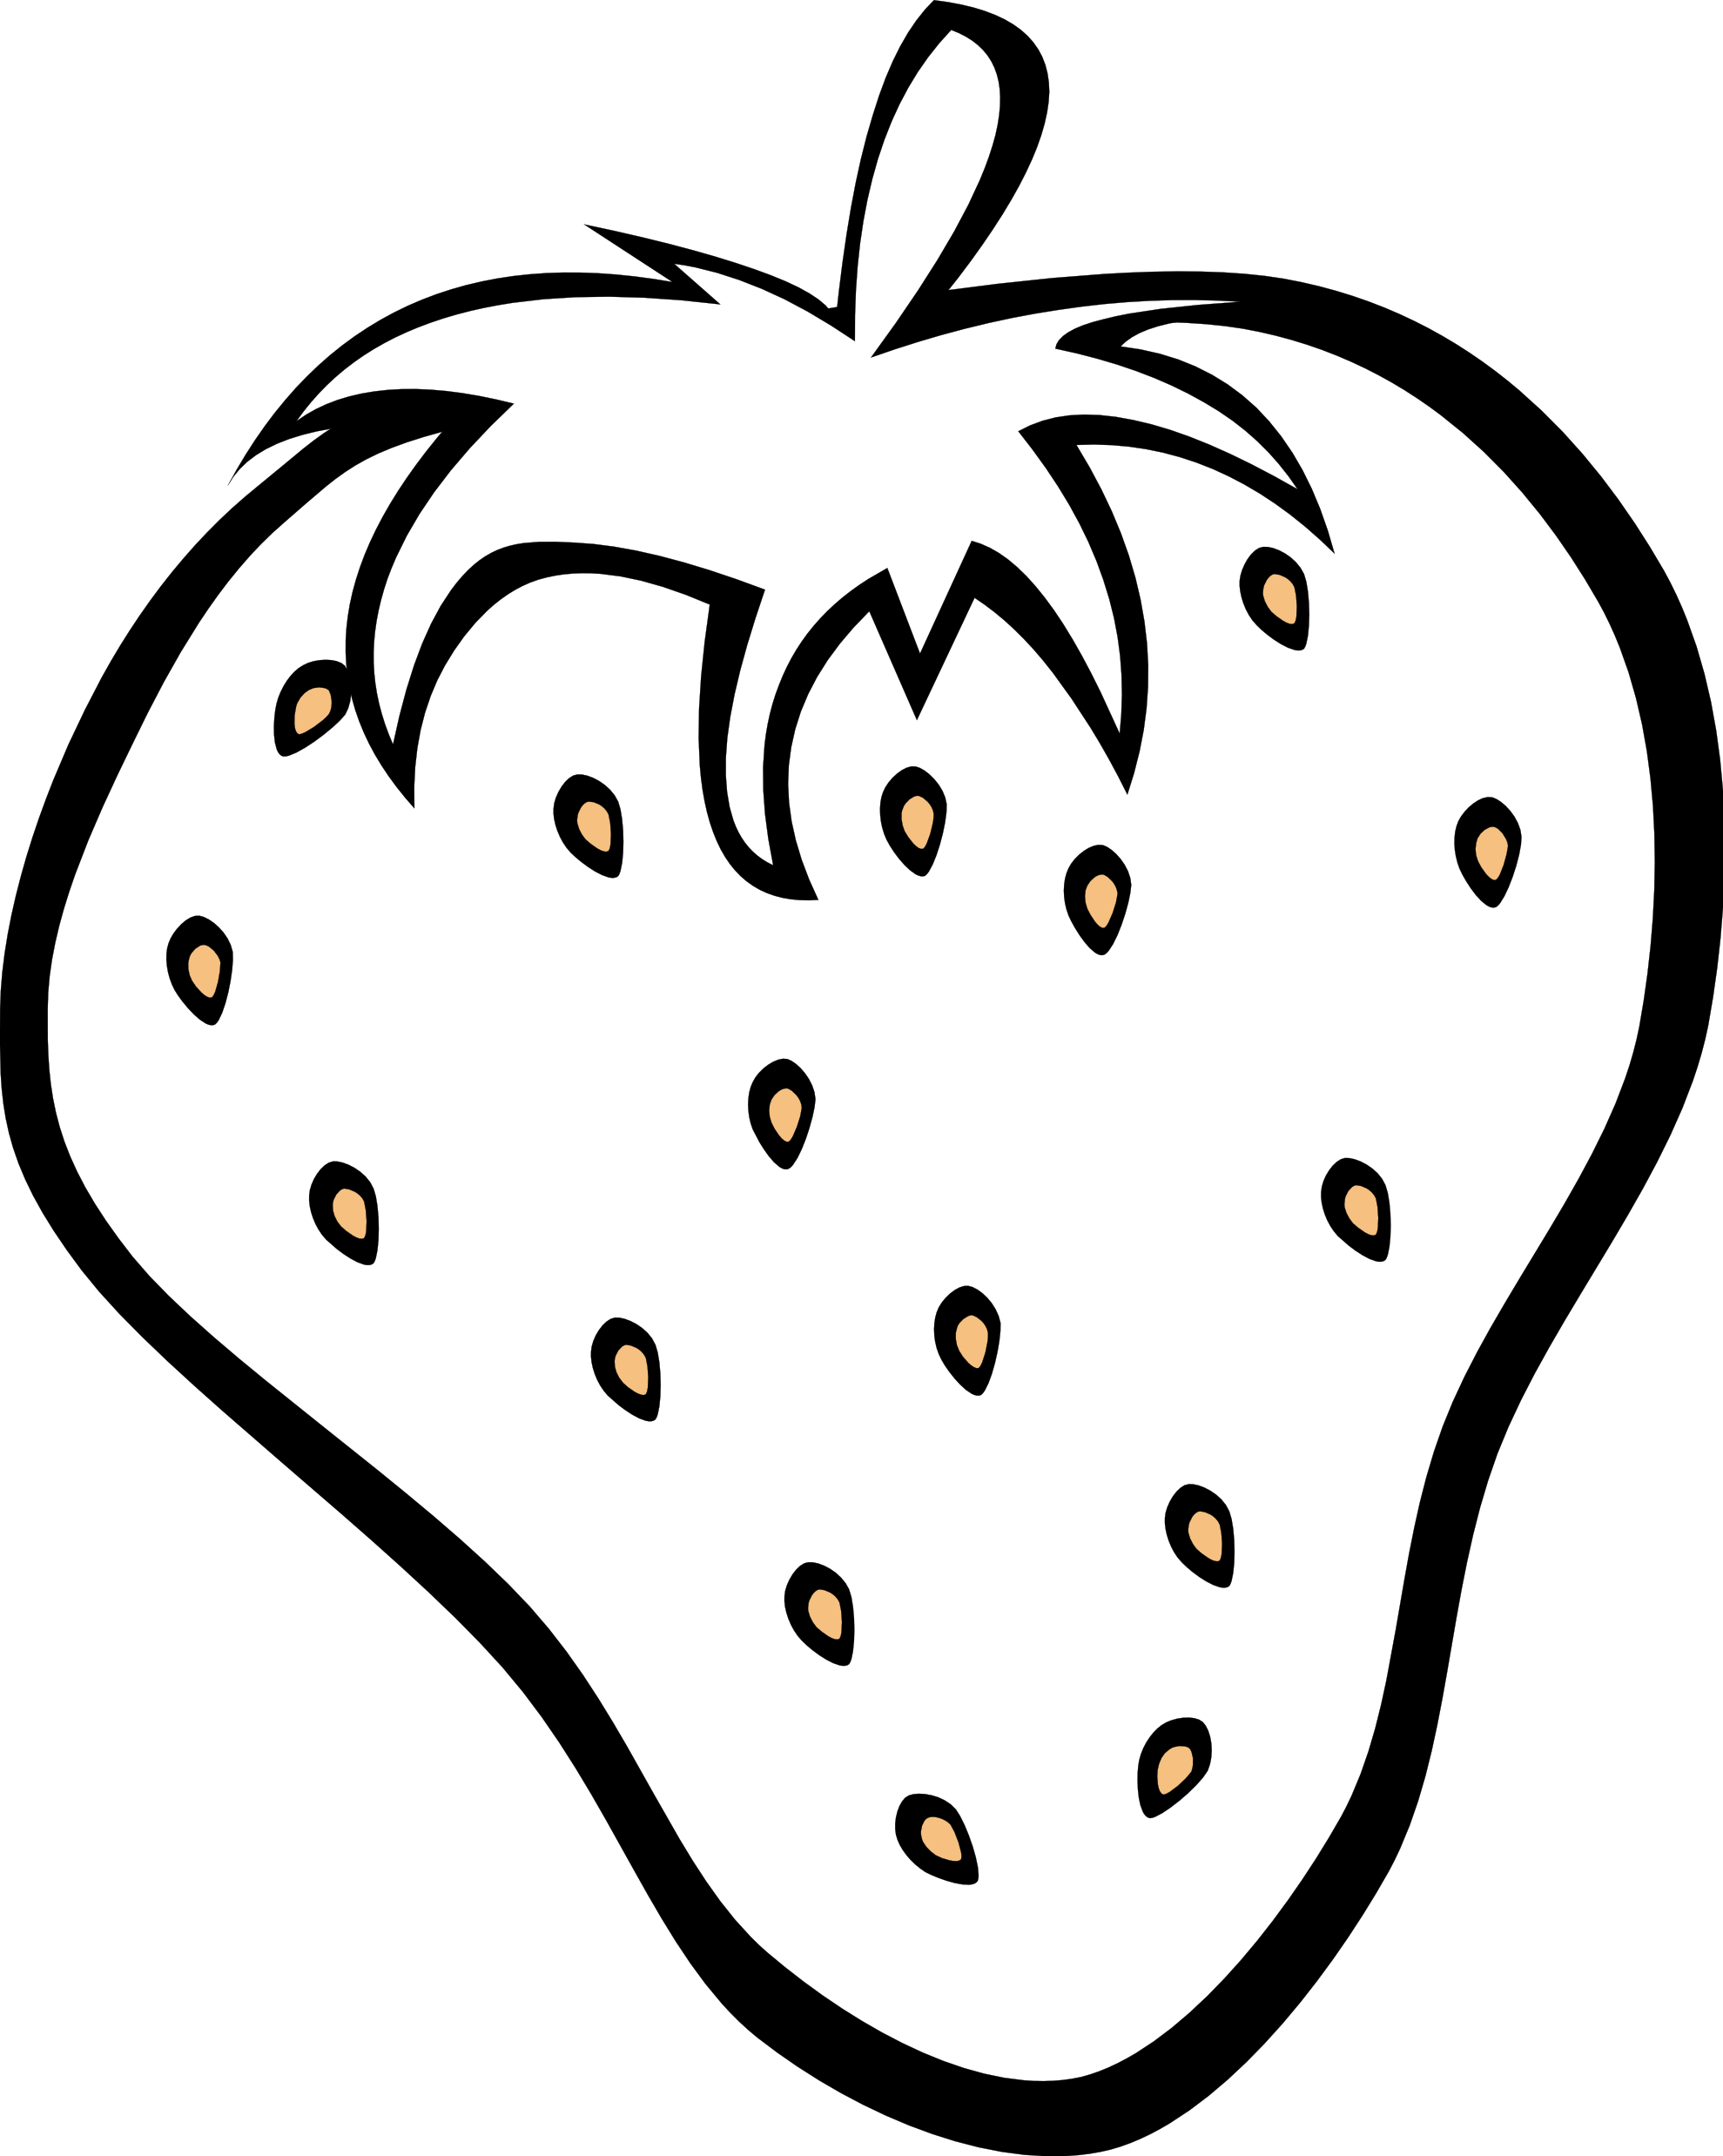 Fruits Clipart Black And White - Free Clipart Images